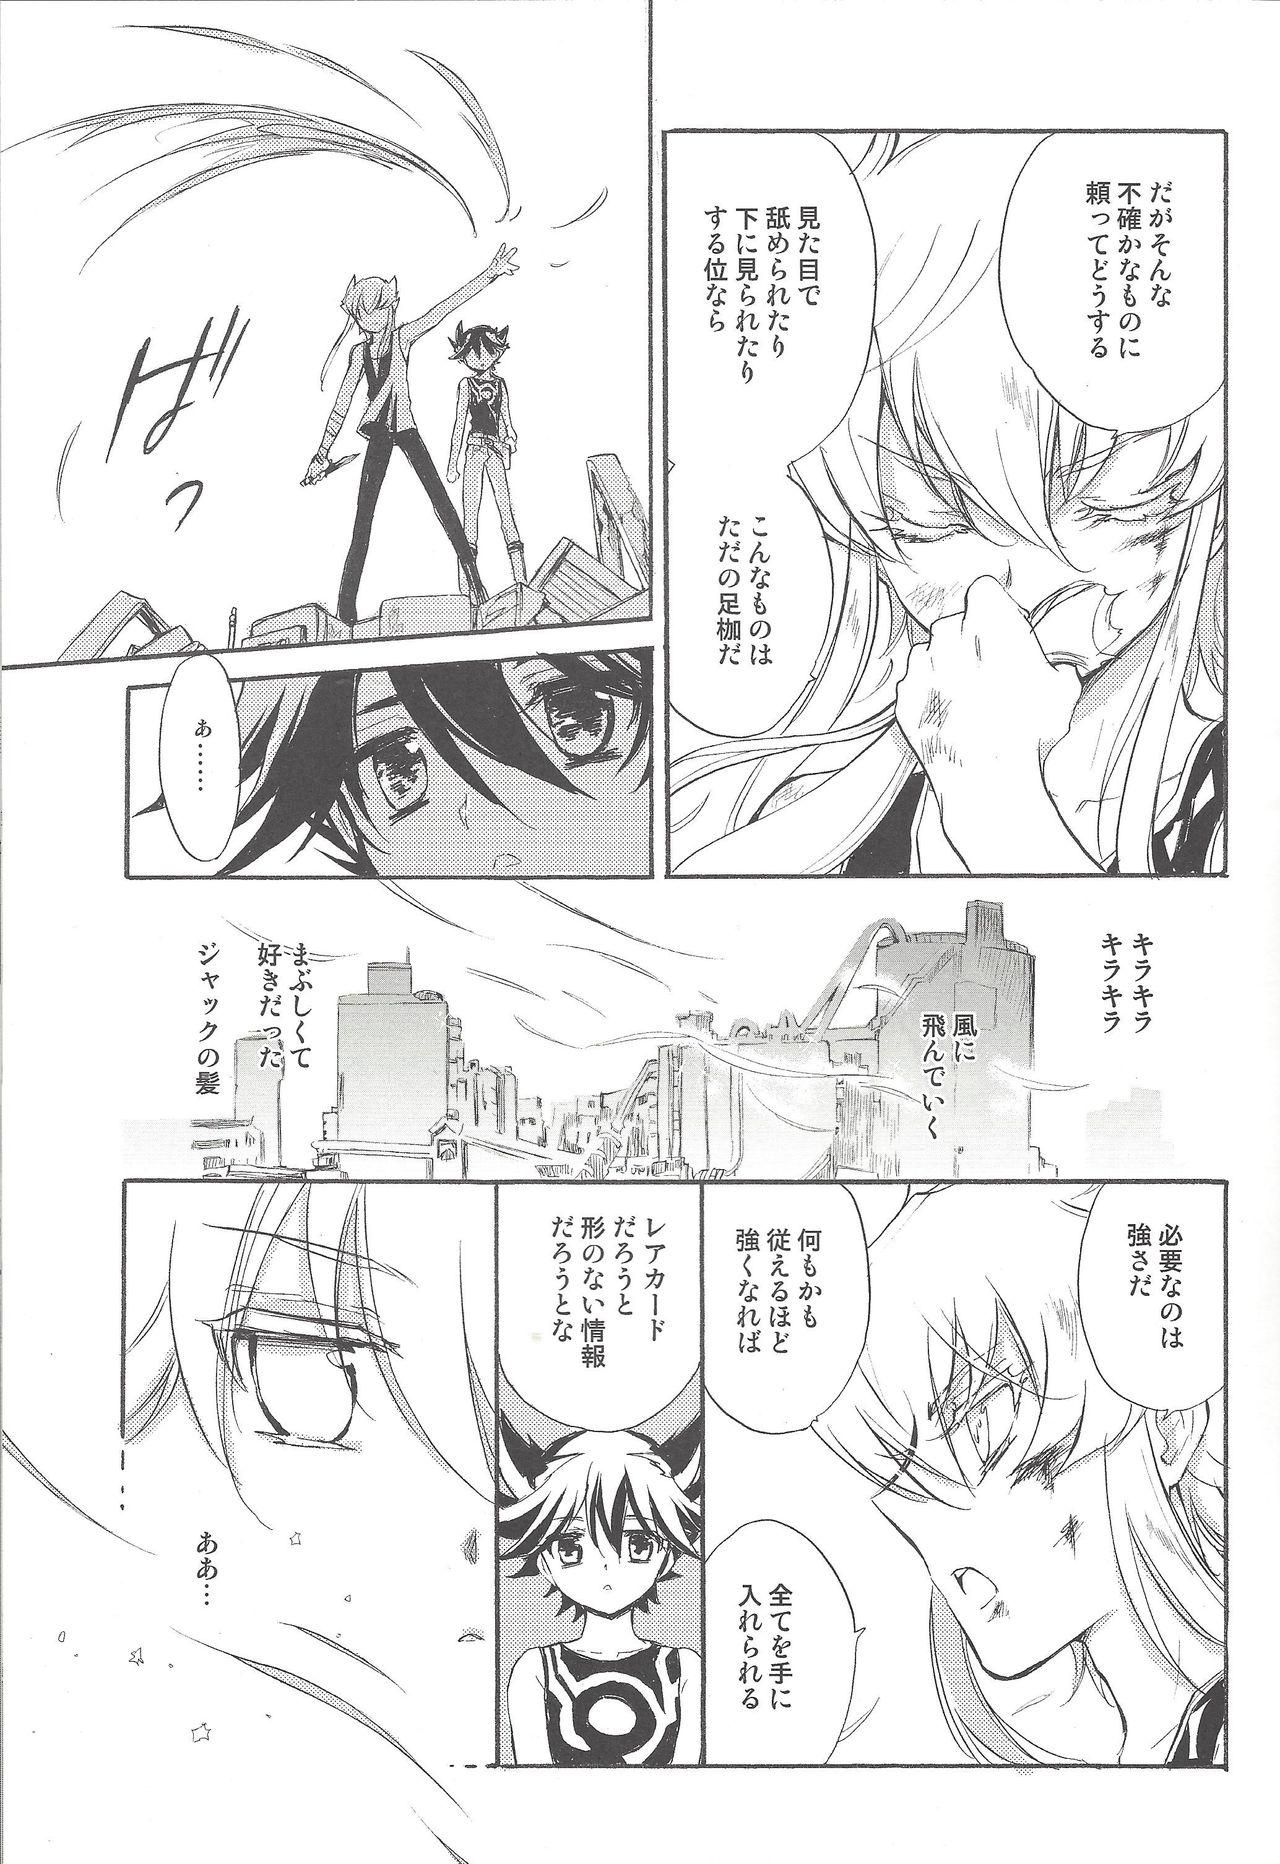 Punishment Hoshi no Love Letter - Yu-gi-oh 5ds Peitos - Page 12